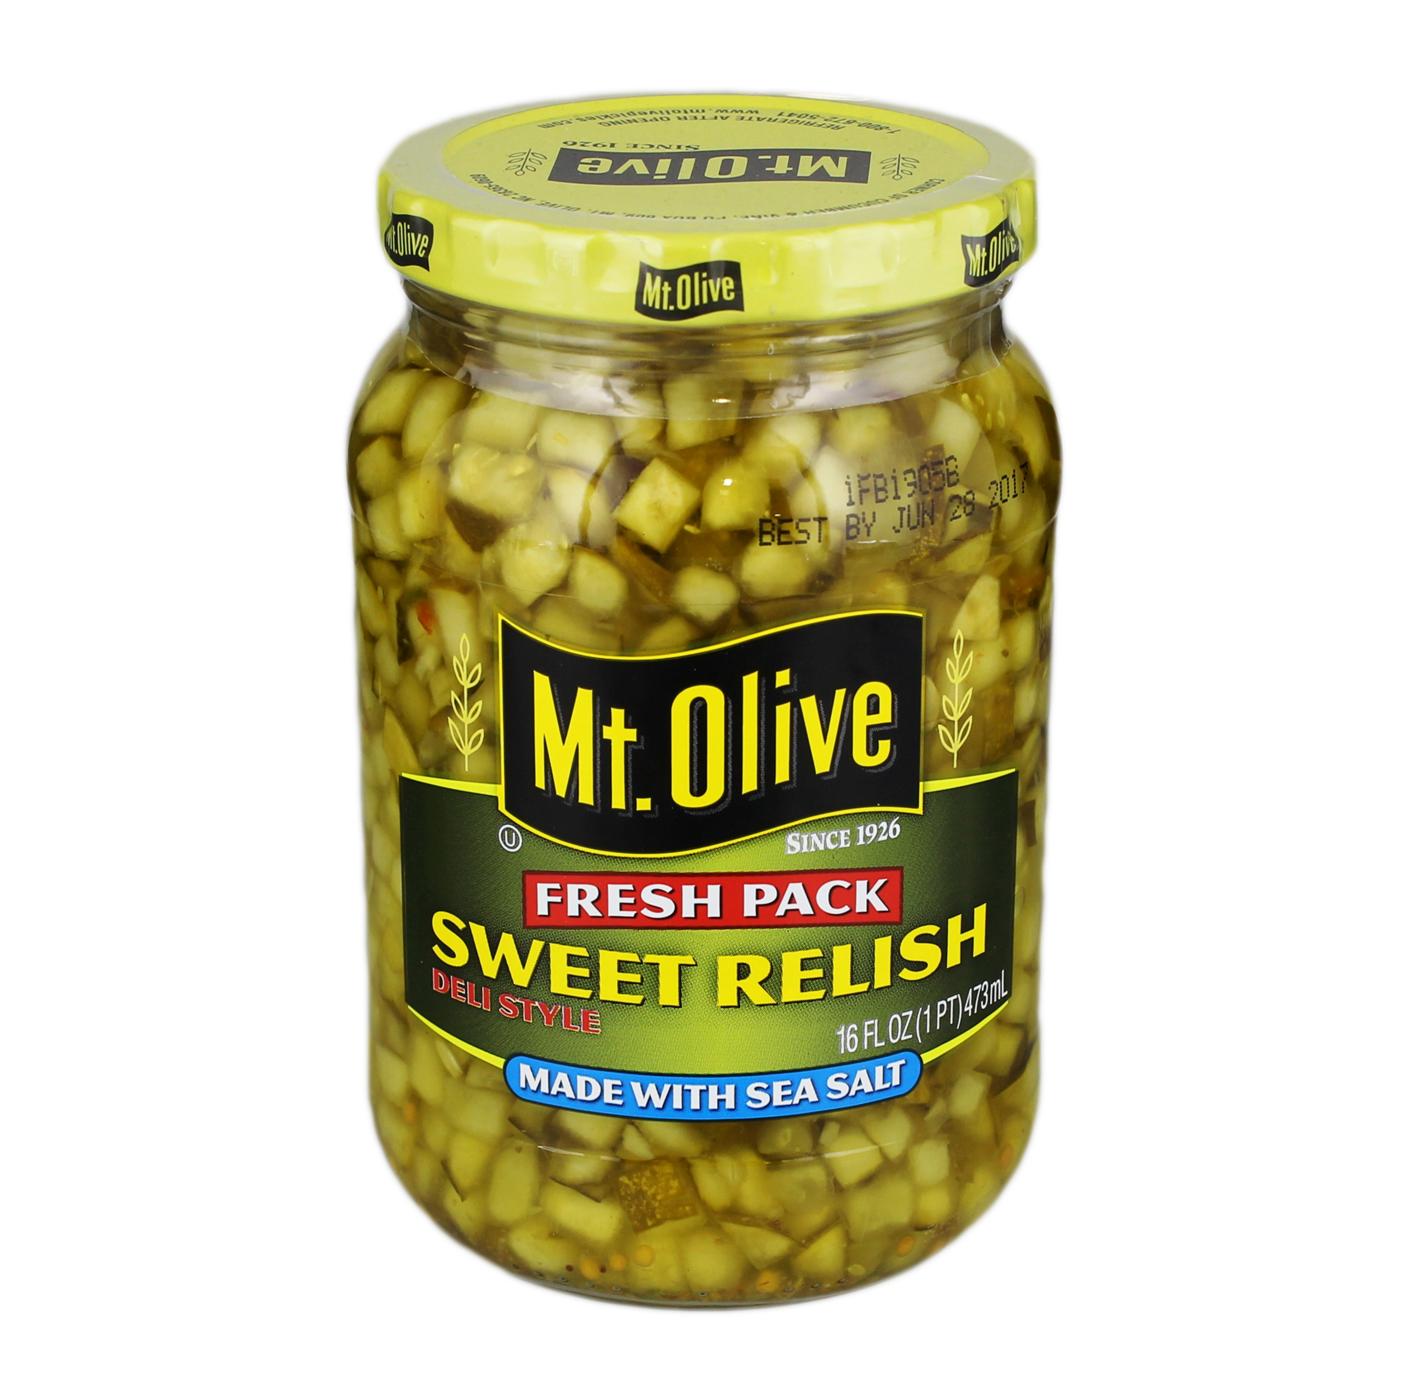 Mt. Olive Fresh Pack Sweet Relish with Sea Salt; image 1 of 2